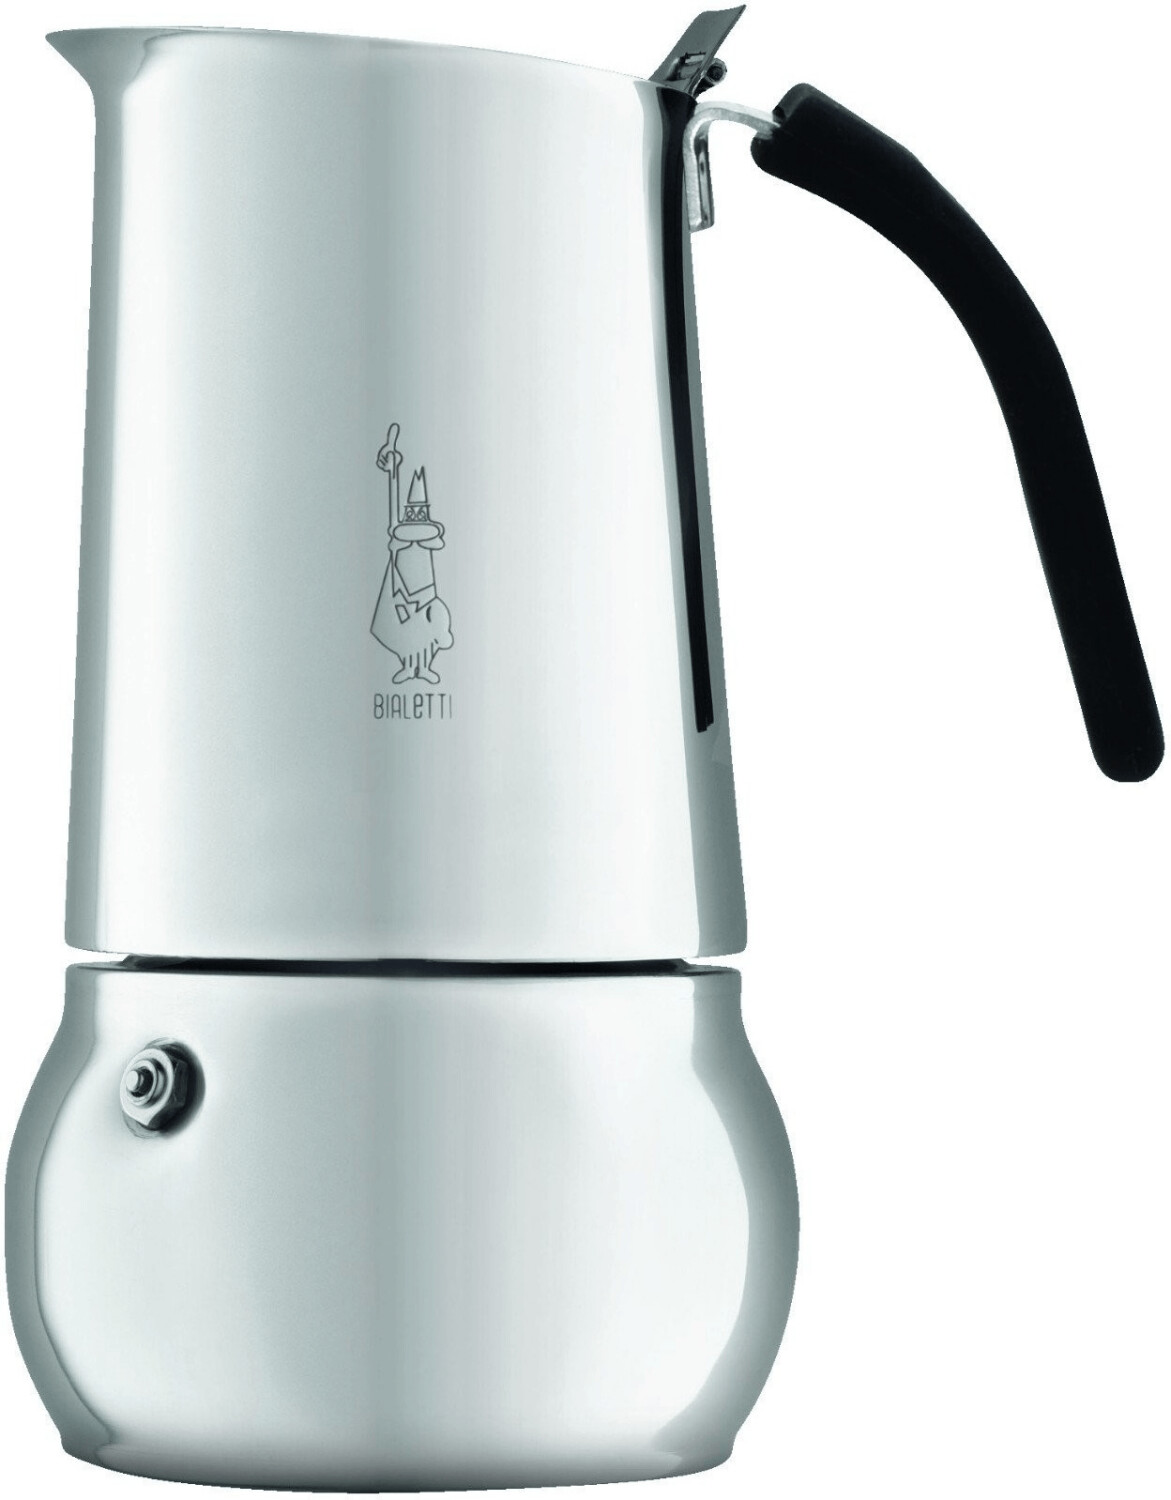 Cafetera Bialetti Kitty, 4 tazas, acero inoxidable - Inffusions Europe S.L.